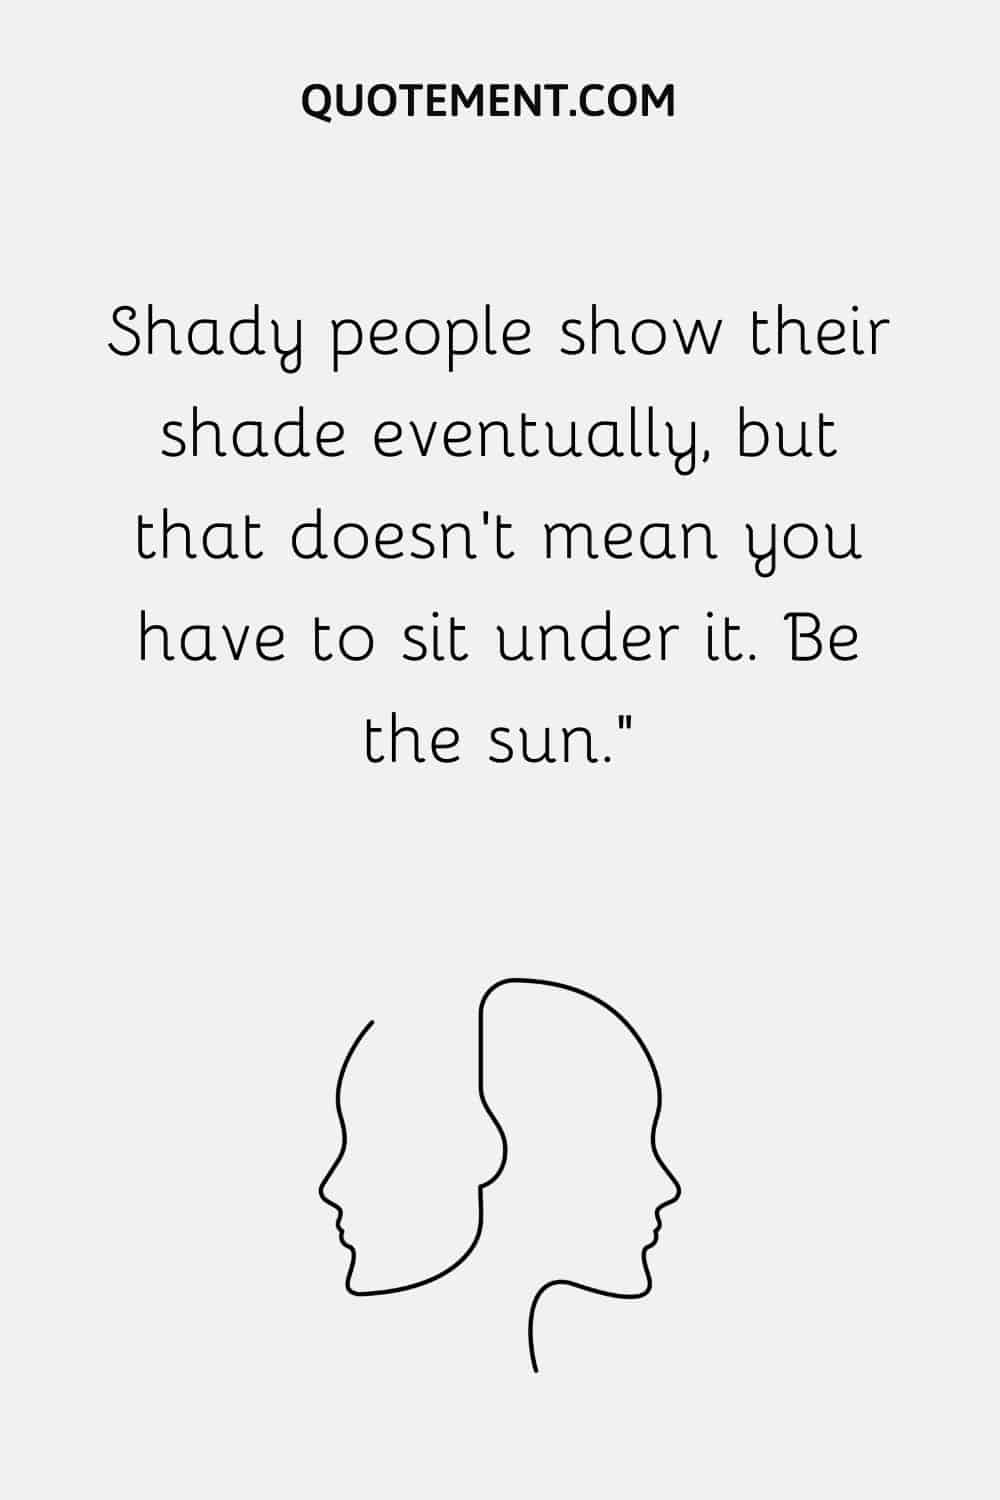 Shady people show their shade eventually, but that doesn’t mean you have to sit under it